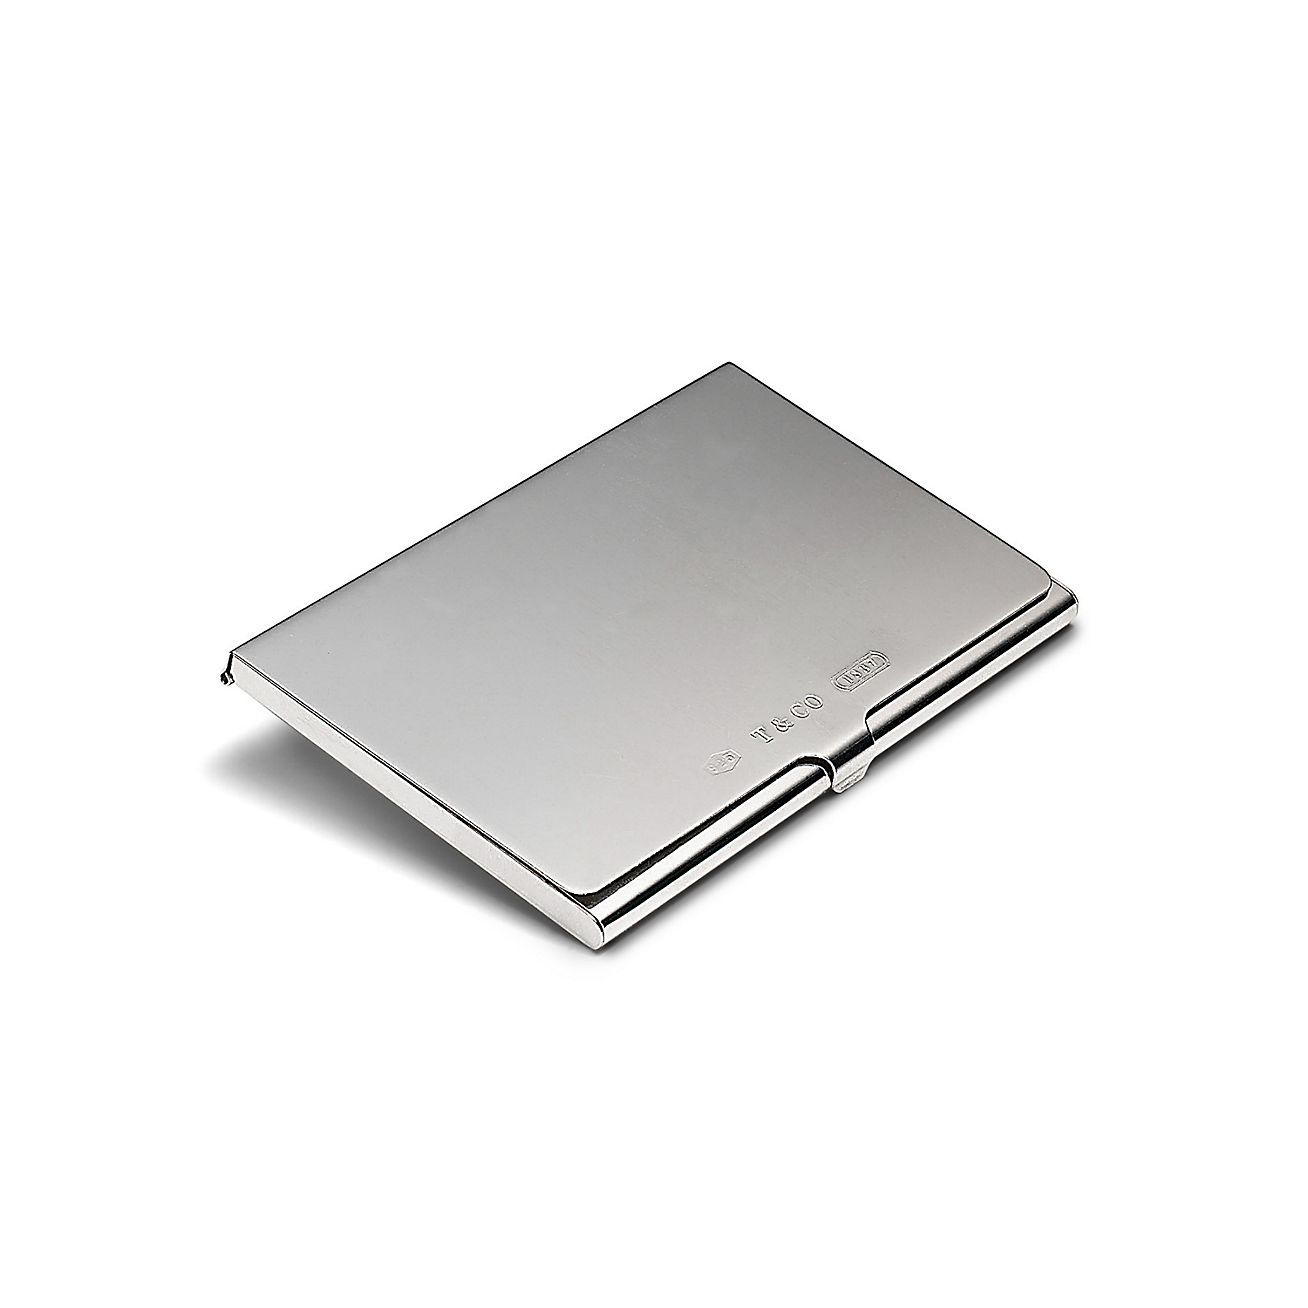 tiffany business card holder silver